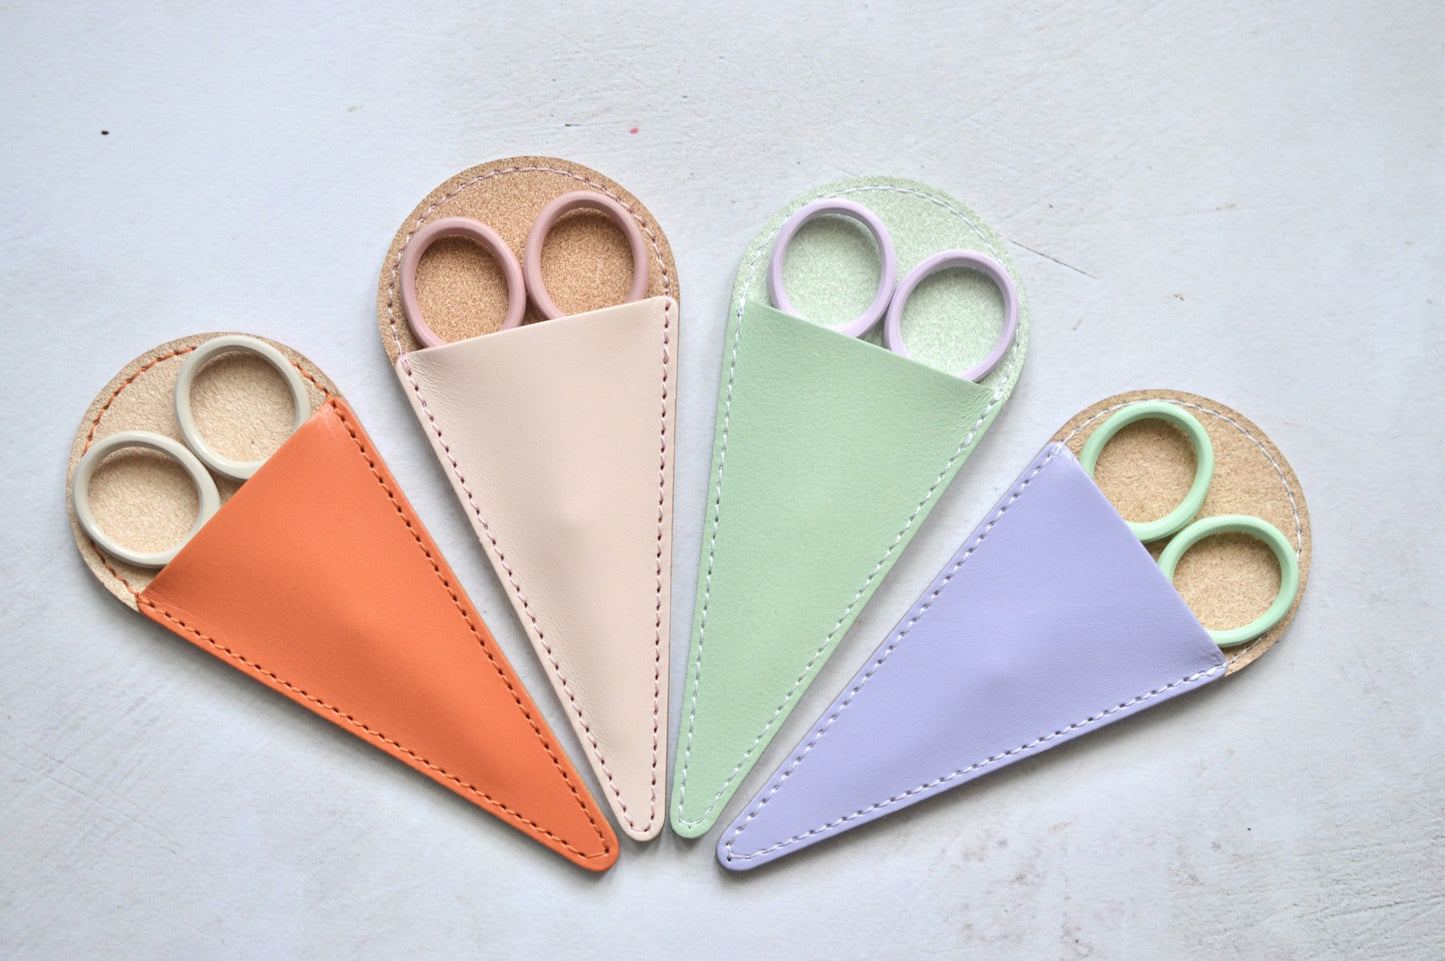 hand made leather case to hold small embroidery scissors. Choose matching or complimentary colours.